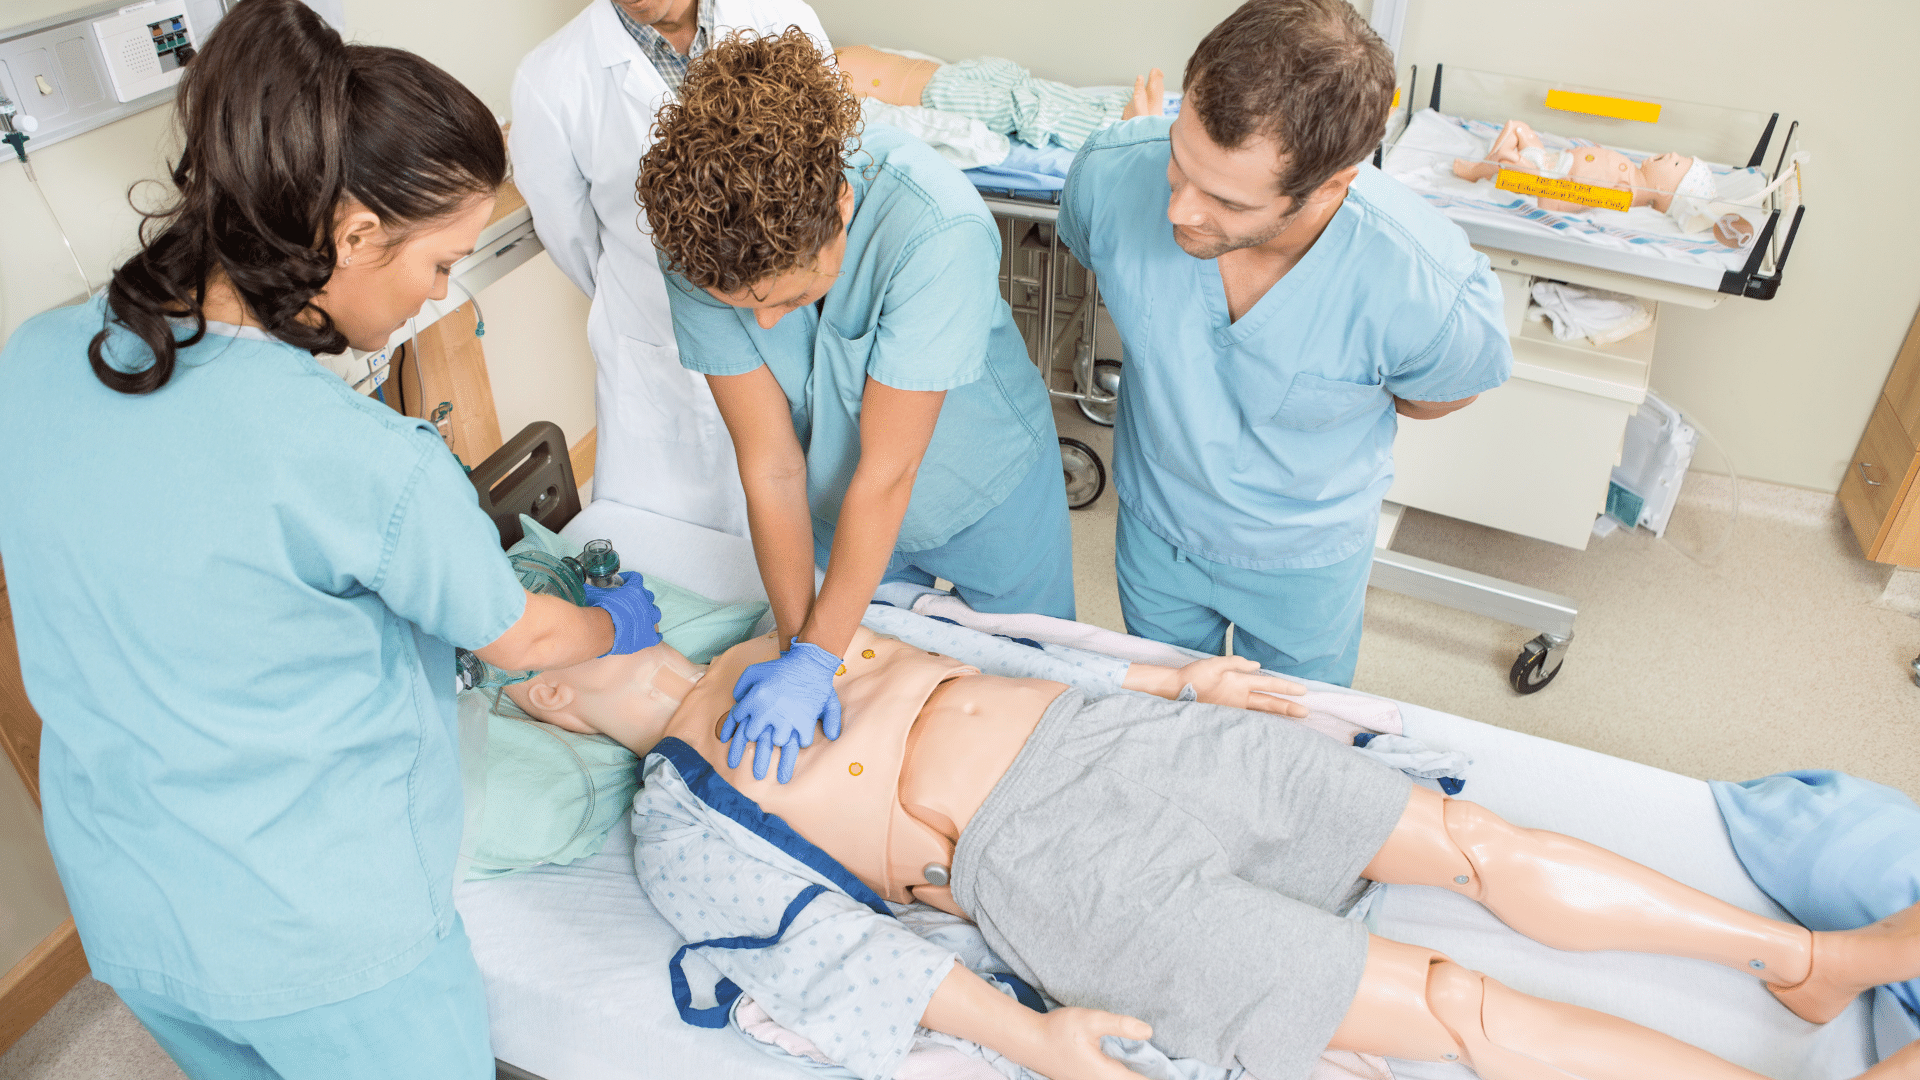 Medical personnel performing CPR on a dummy